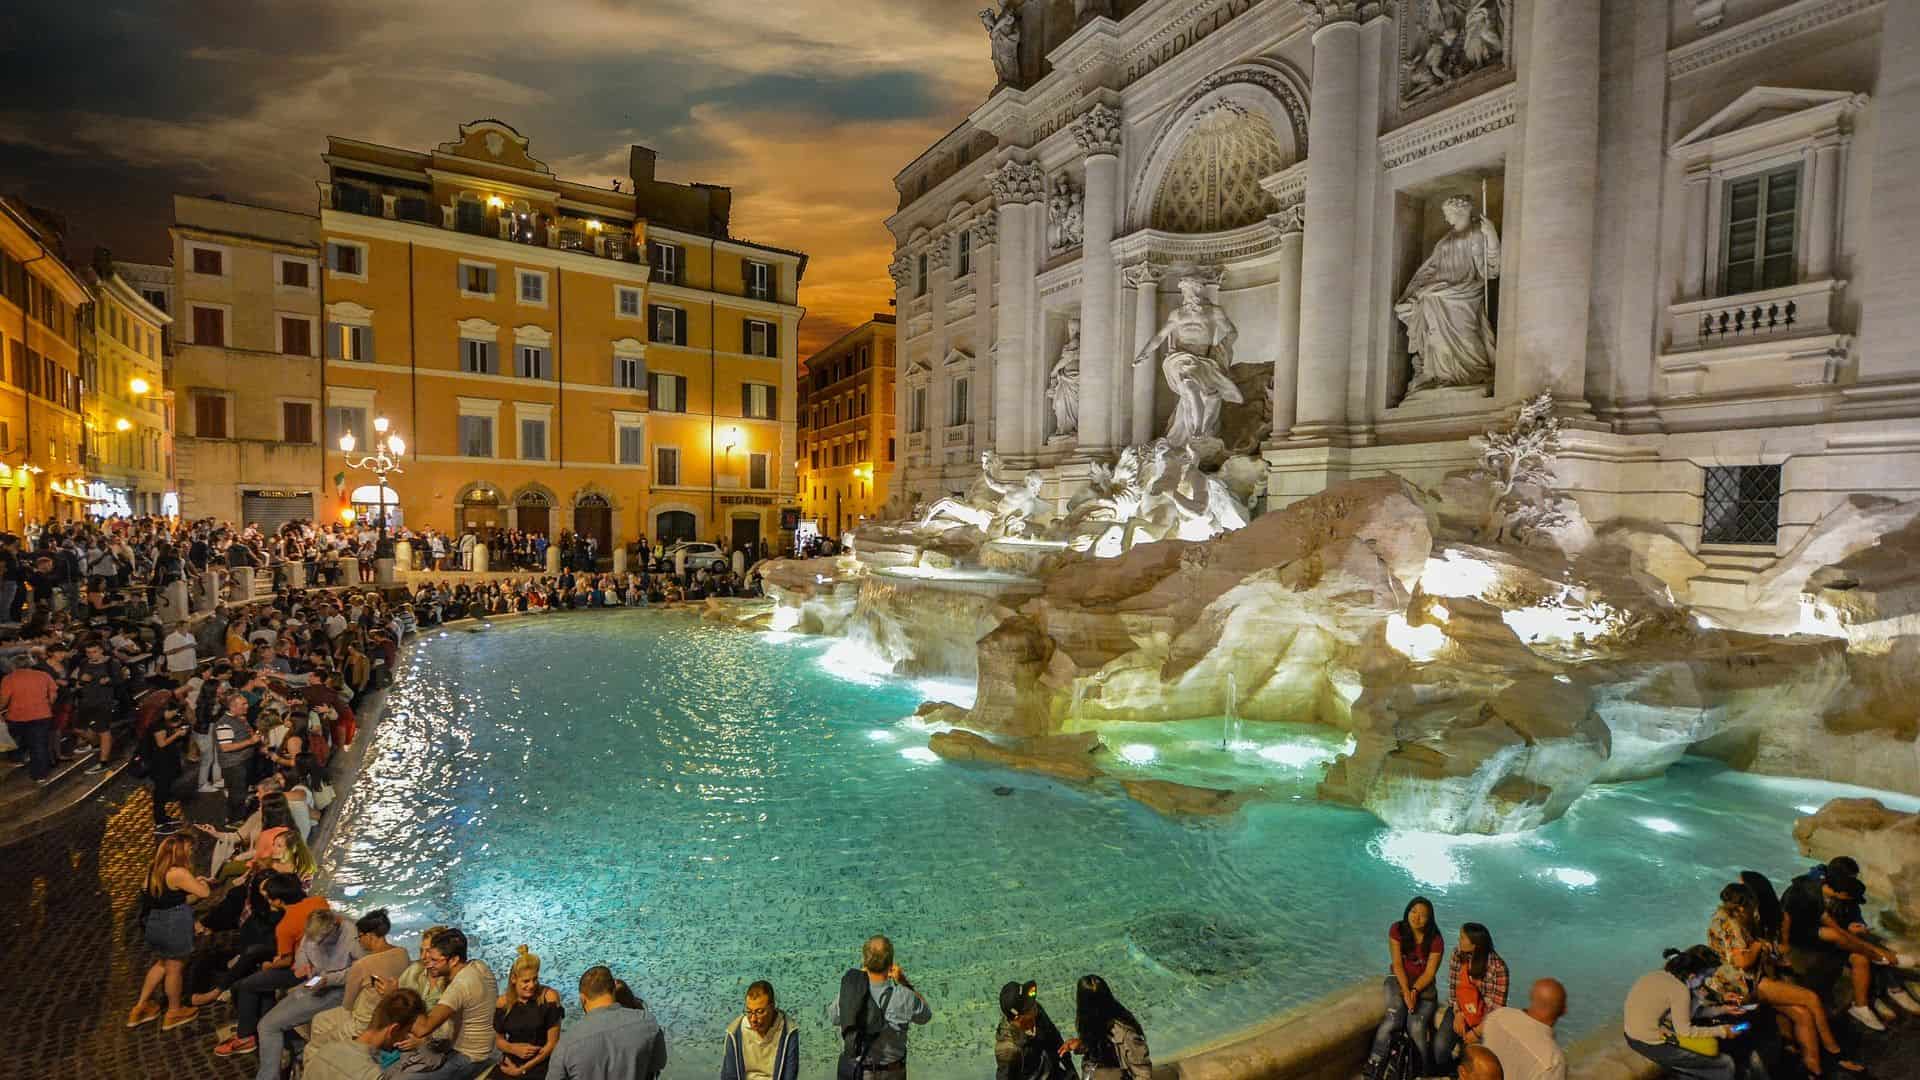 People visiting the Trevi Fountain at night